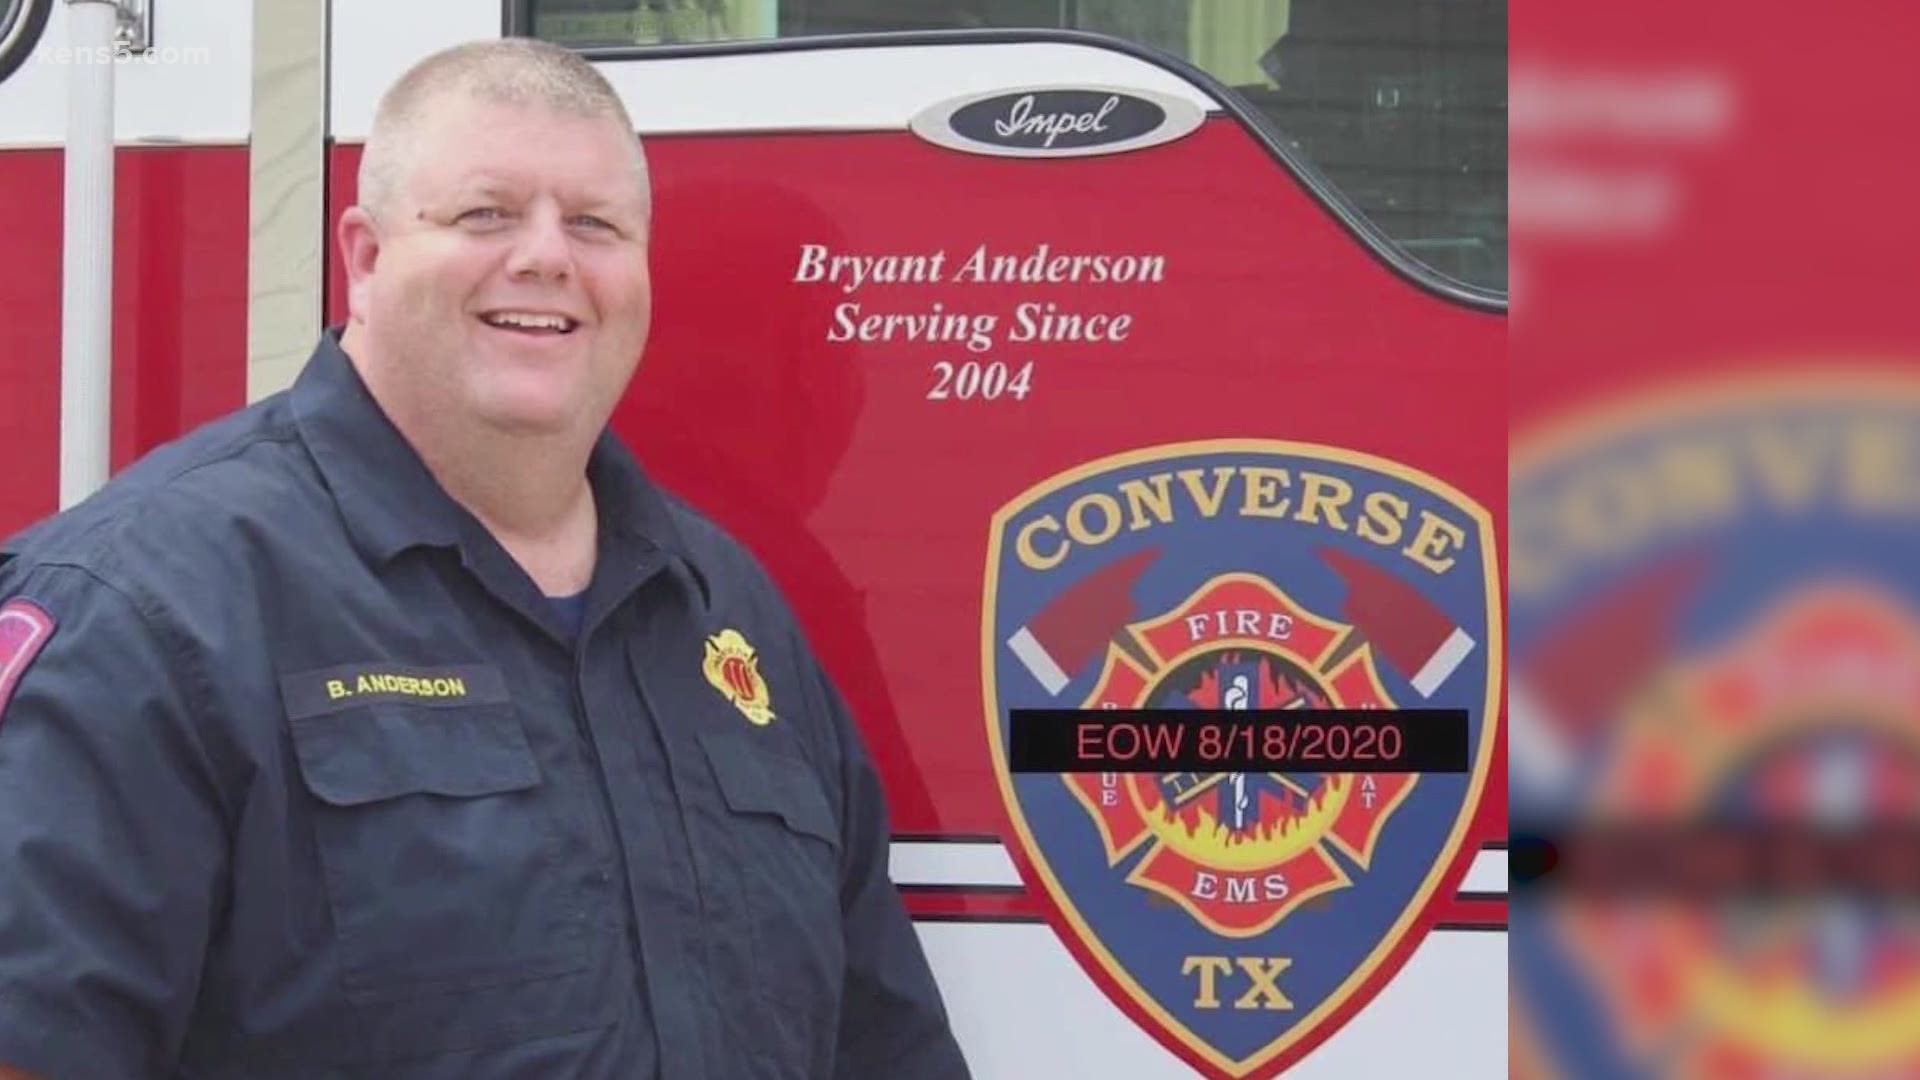 Bryant Anderson was remembered as a selfless leader, generous mentor and dedicated community servant.